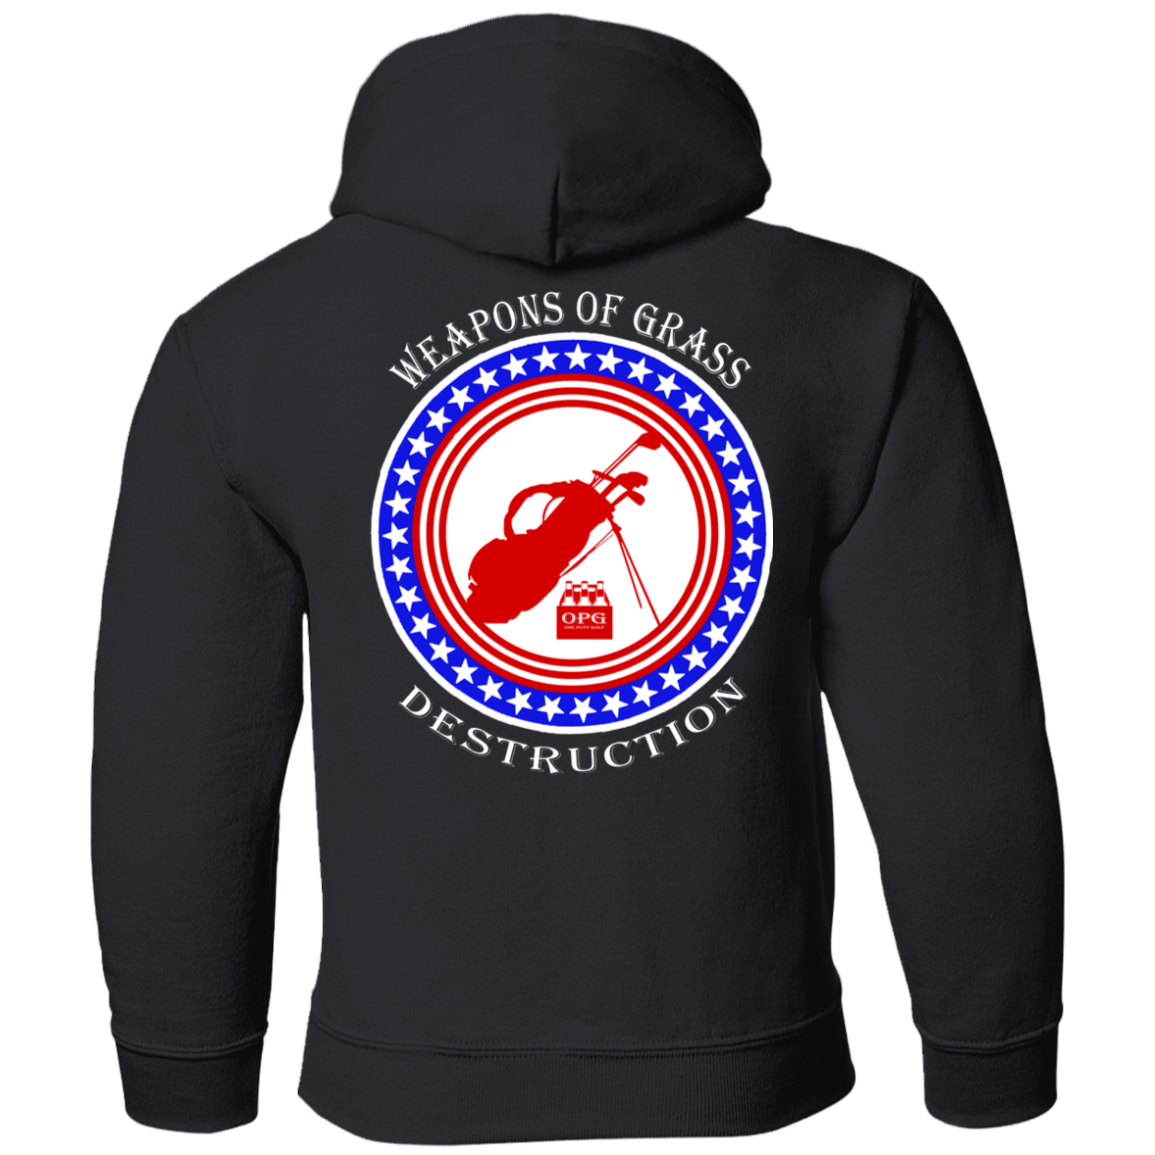 OPG Custom Design #18. Weapons of Grass Destructions. Youth Pullover